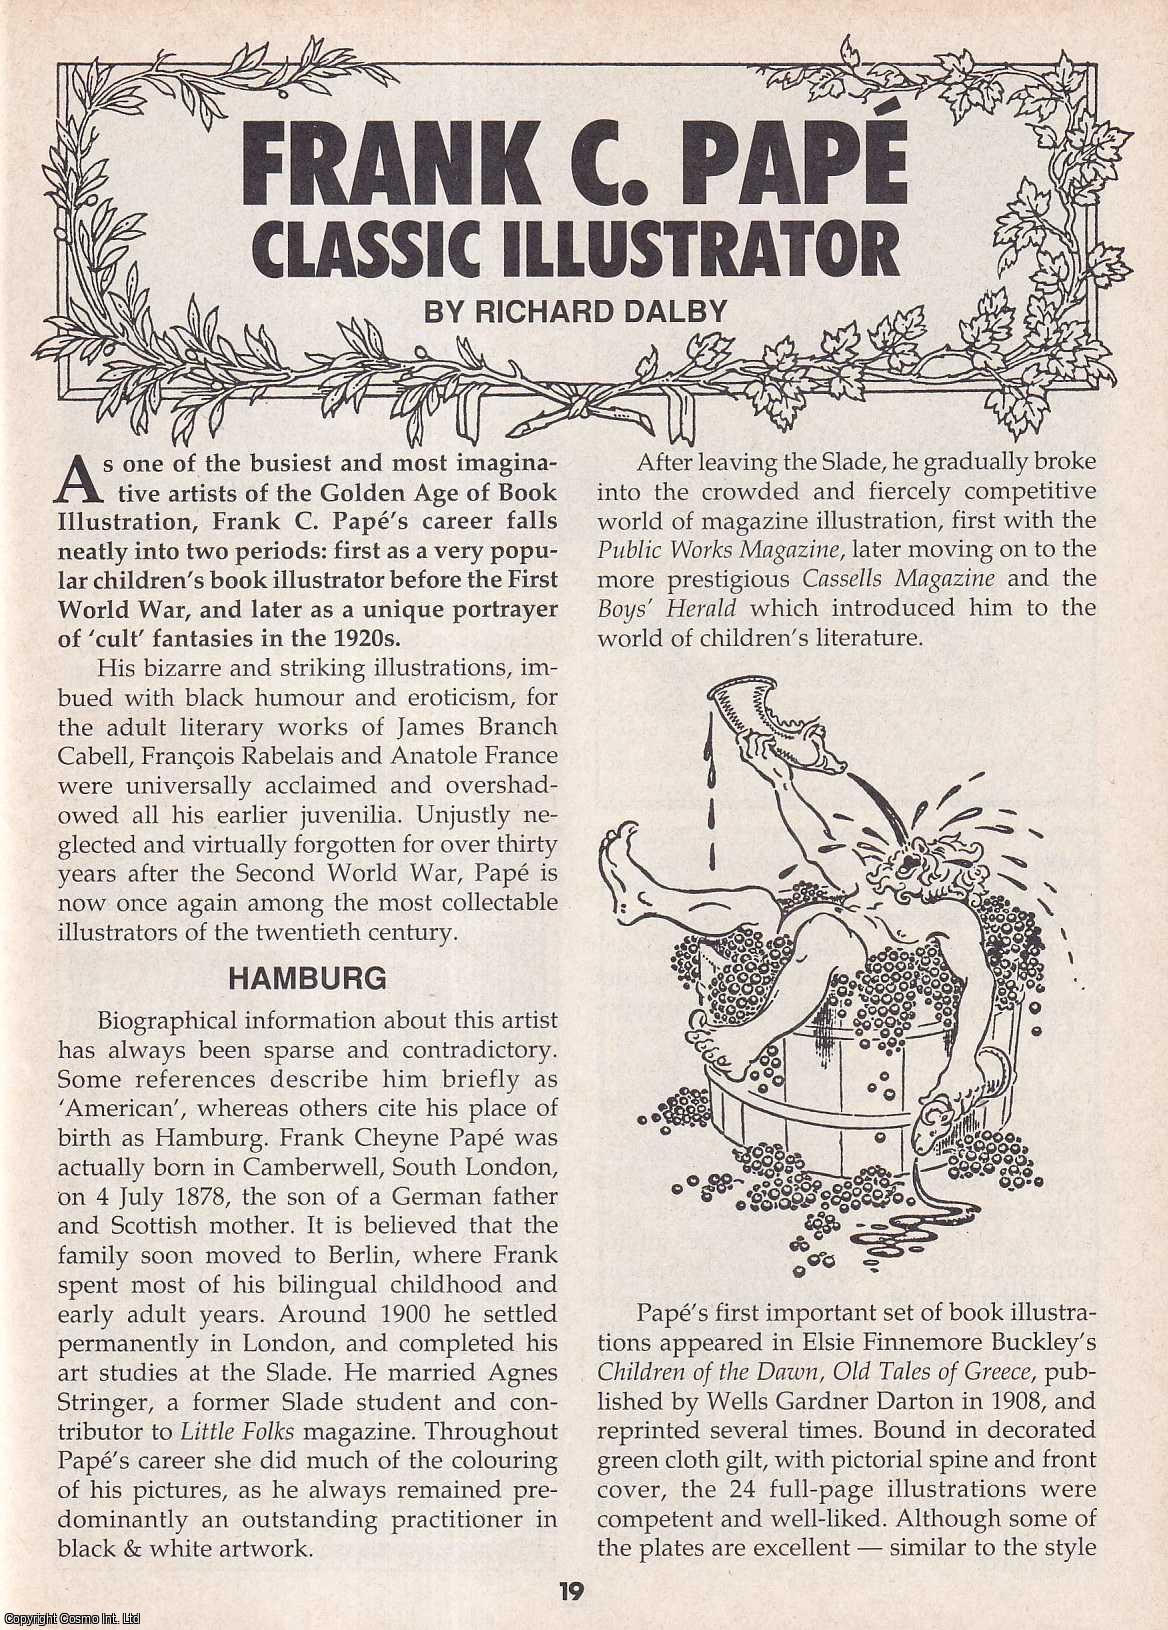 Richard Dalby - Frank C. Pape. Classic Illustrator. This is an original article separated from an issue of The Book & Magazine Collector publication.